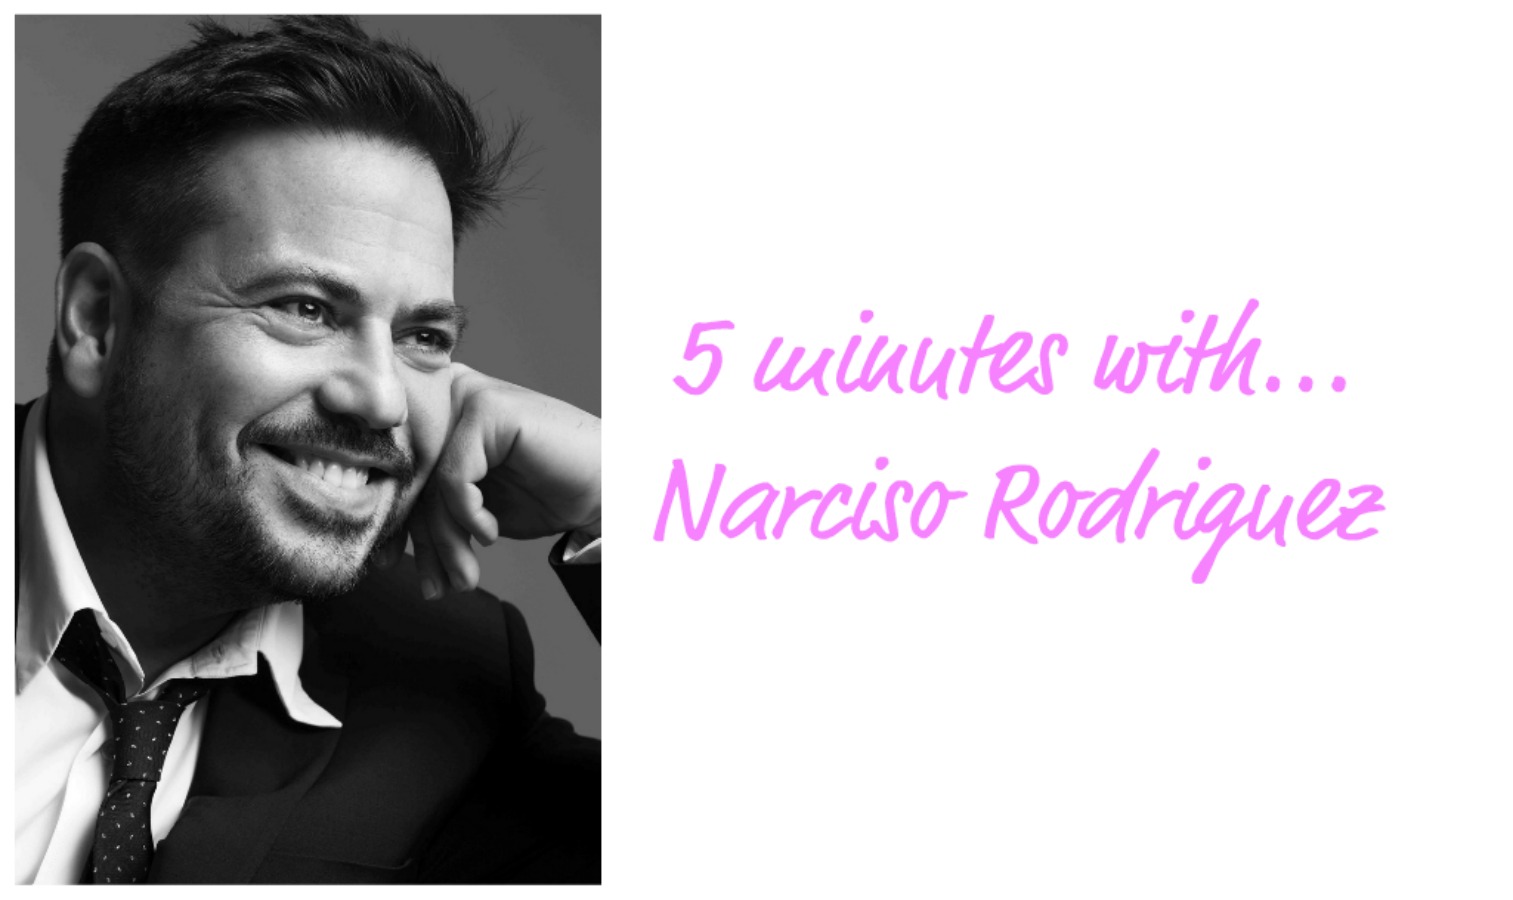 5 minutes with... Narciso Rodriguez!